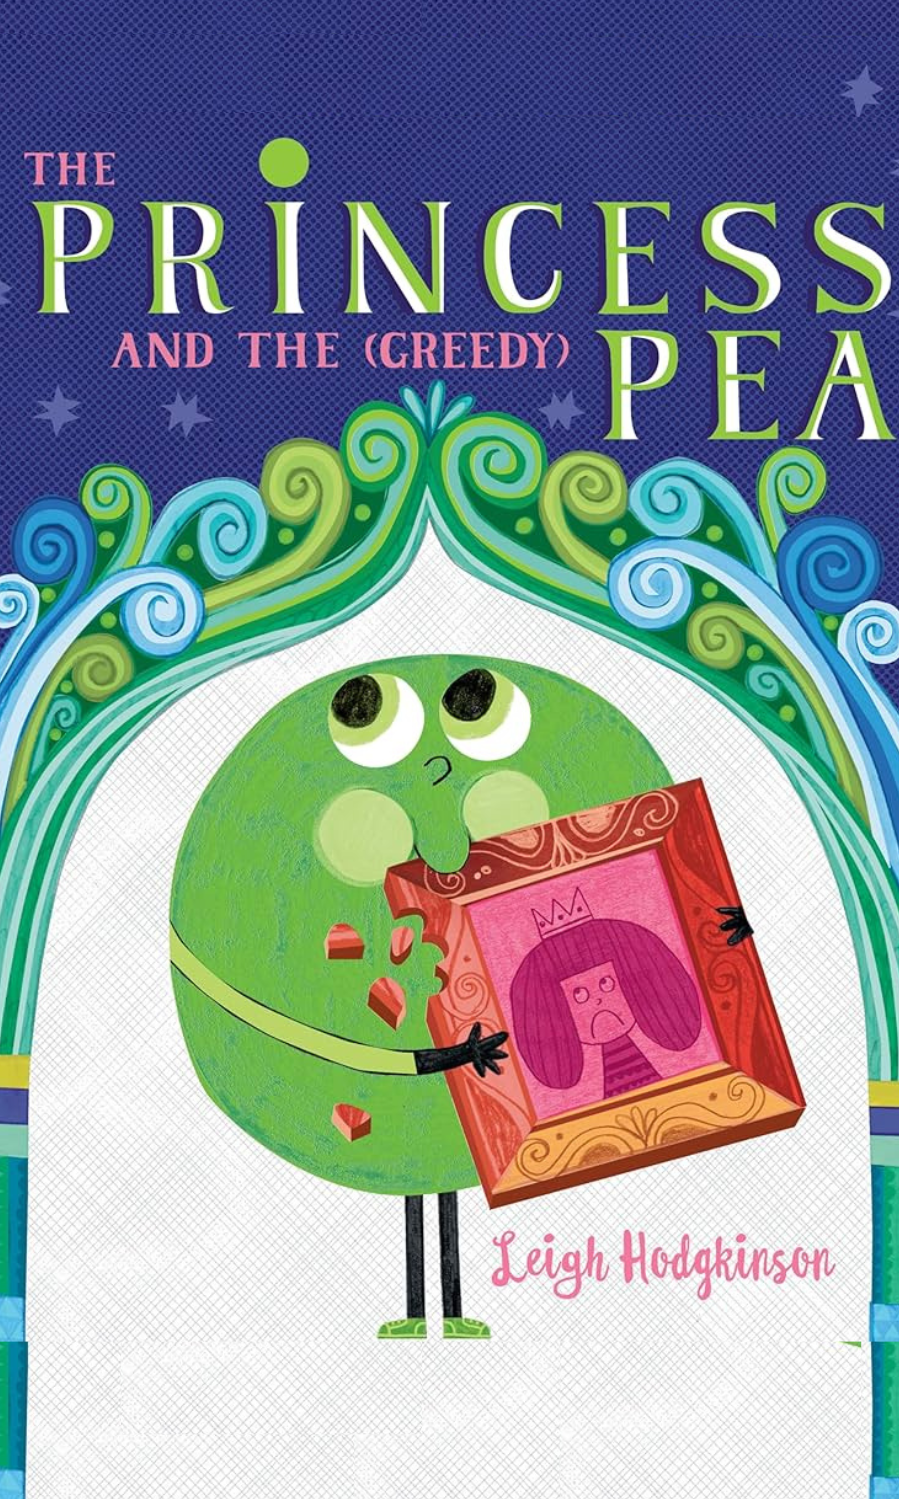 The Princess and the (Greedy) Pea by Leigh Hodgkinson